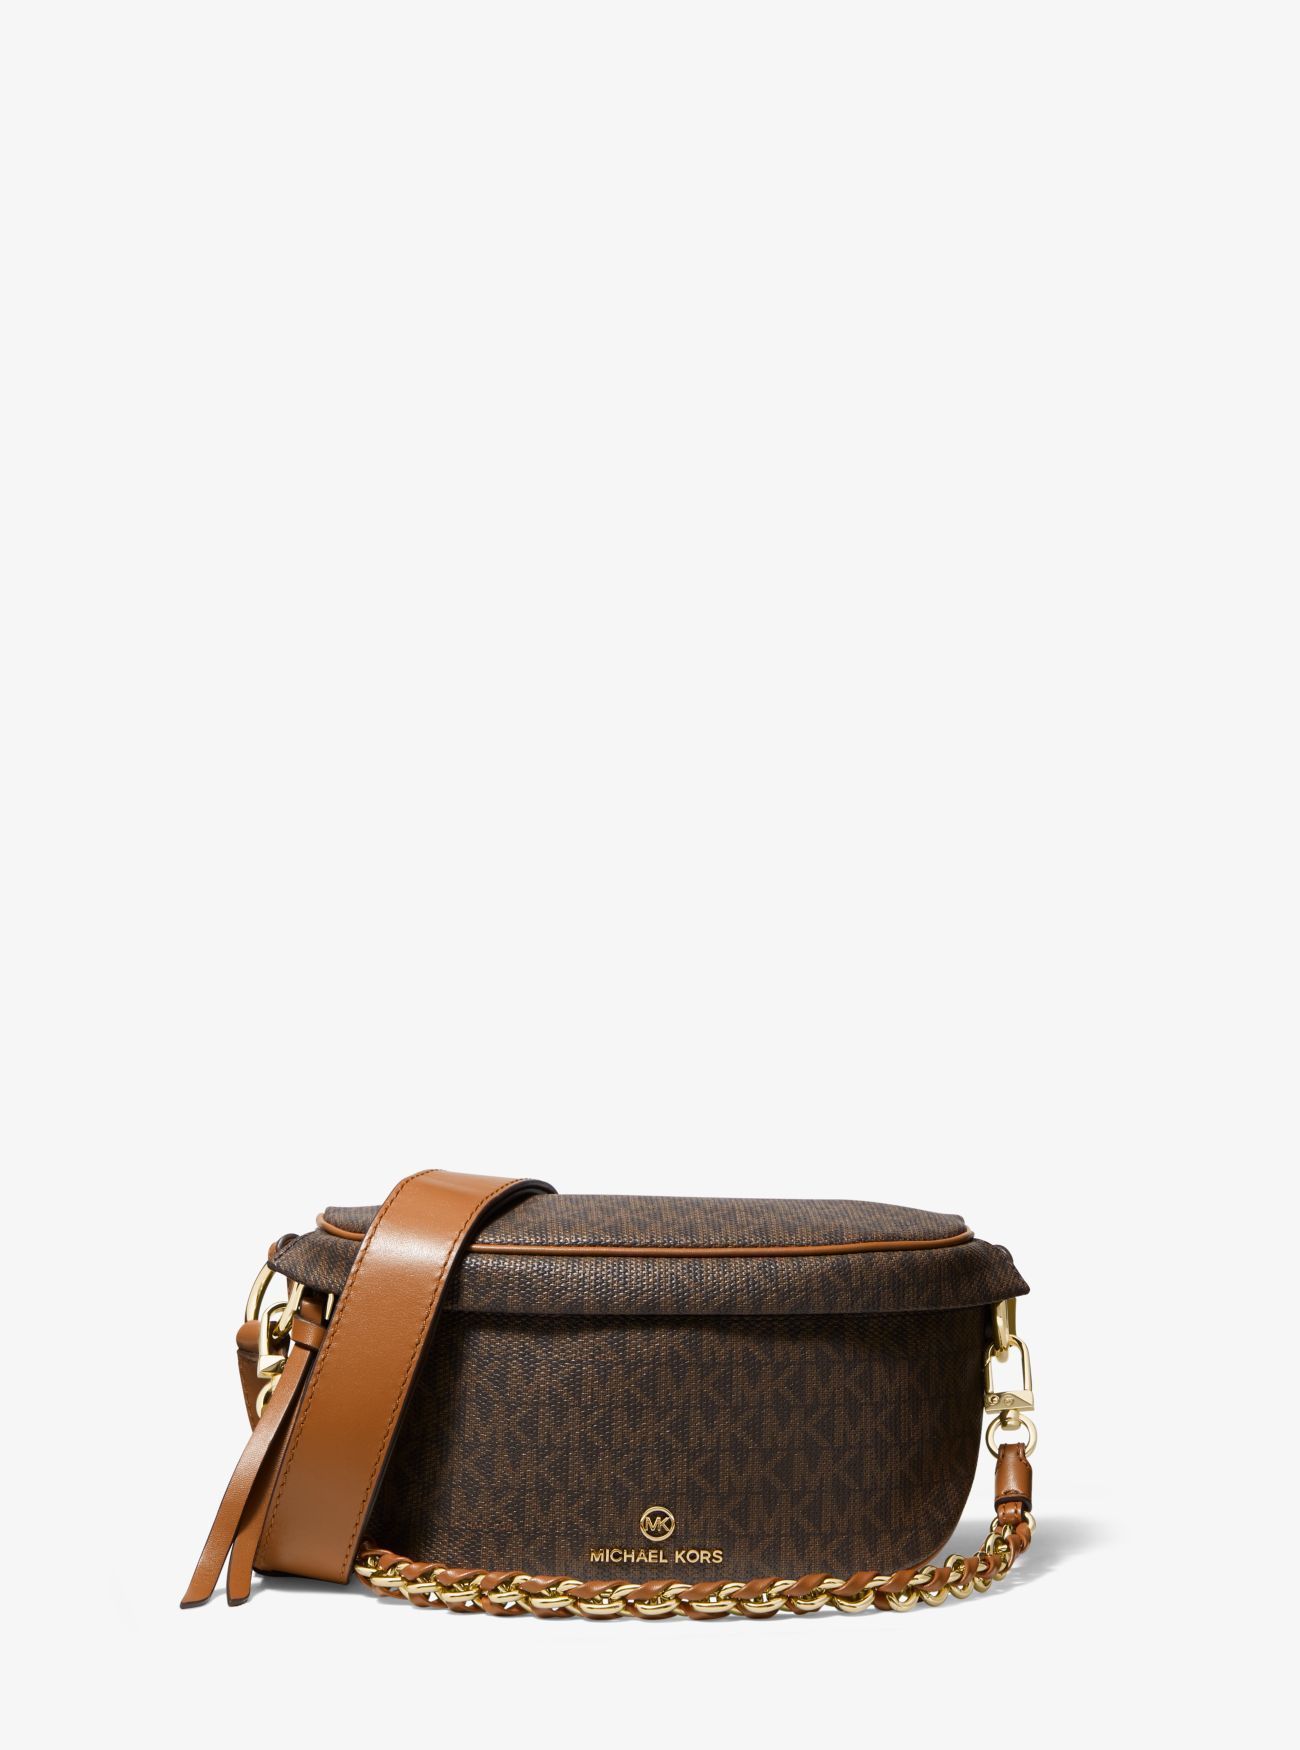 MICHAEL KORS EXTRA-SMALL LOGO SLING PACK ΤΣΑΝΤΑ